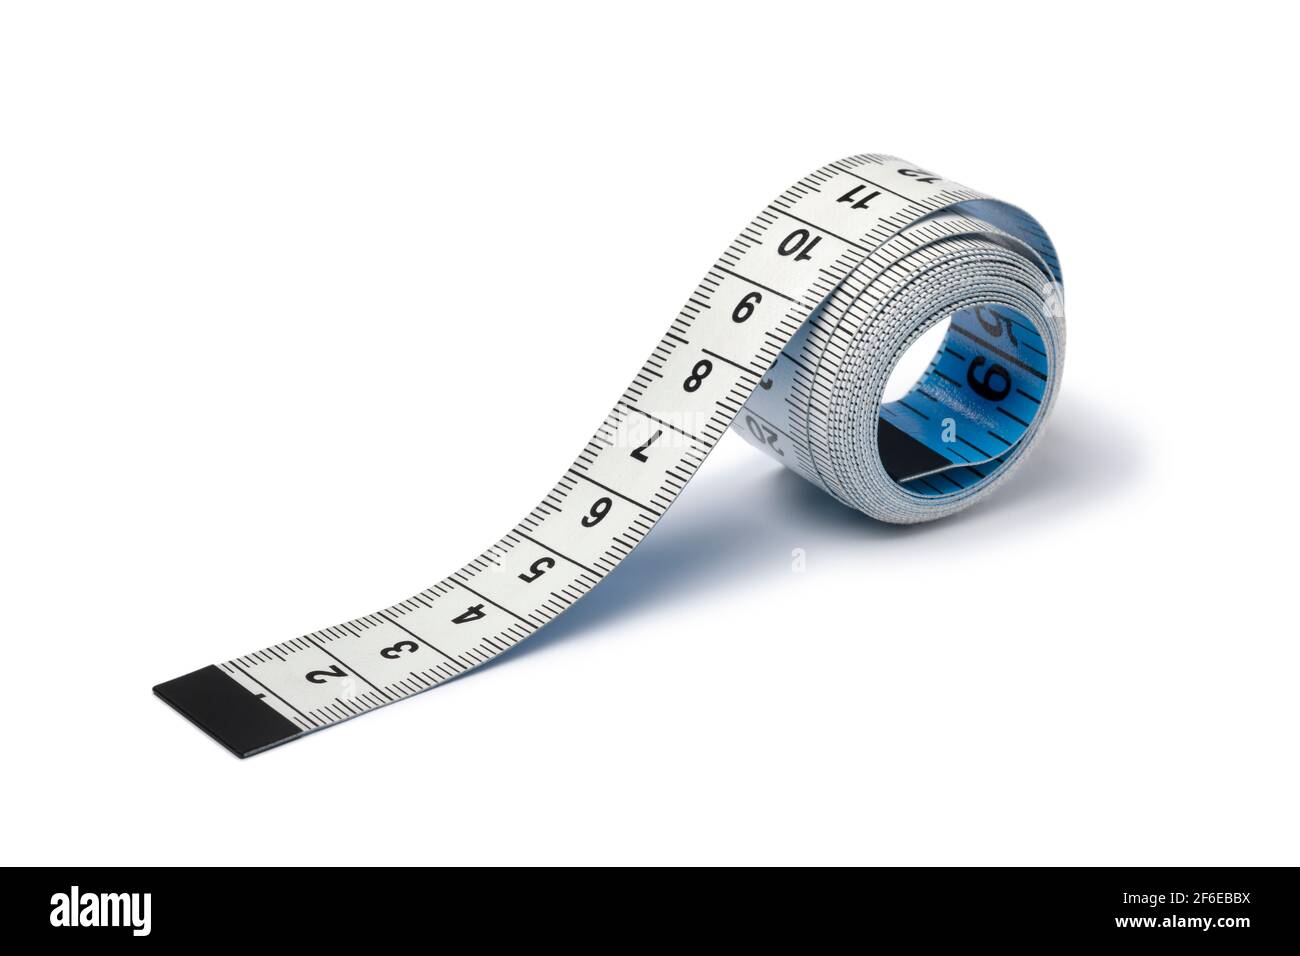 https://c8.alamy.com/comp/2F6EBBX/single-rolled-measuring-tape-close-up-isolated-on-white-background-2F6EBBX.jpg